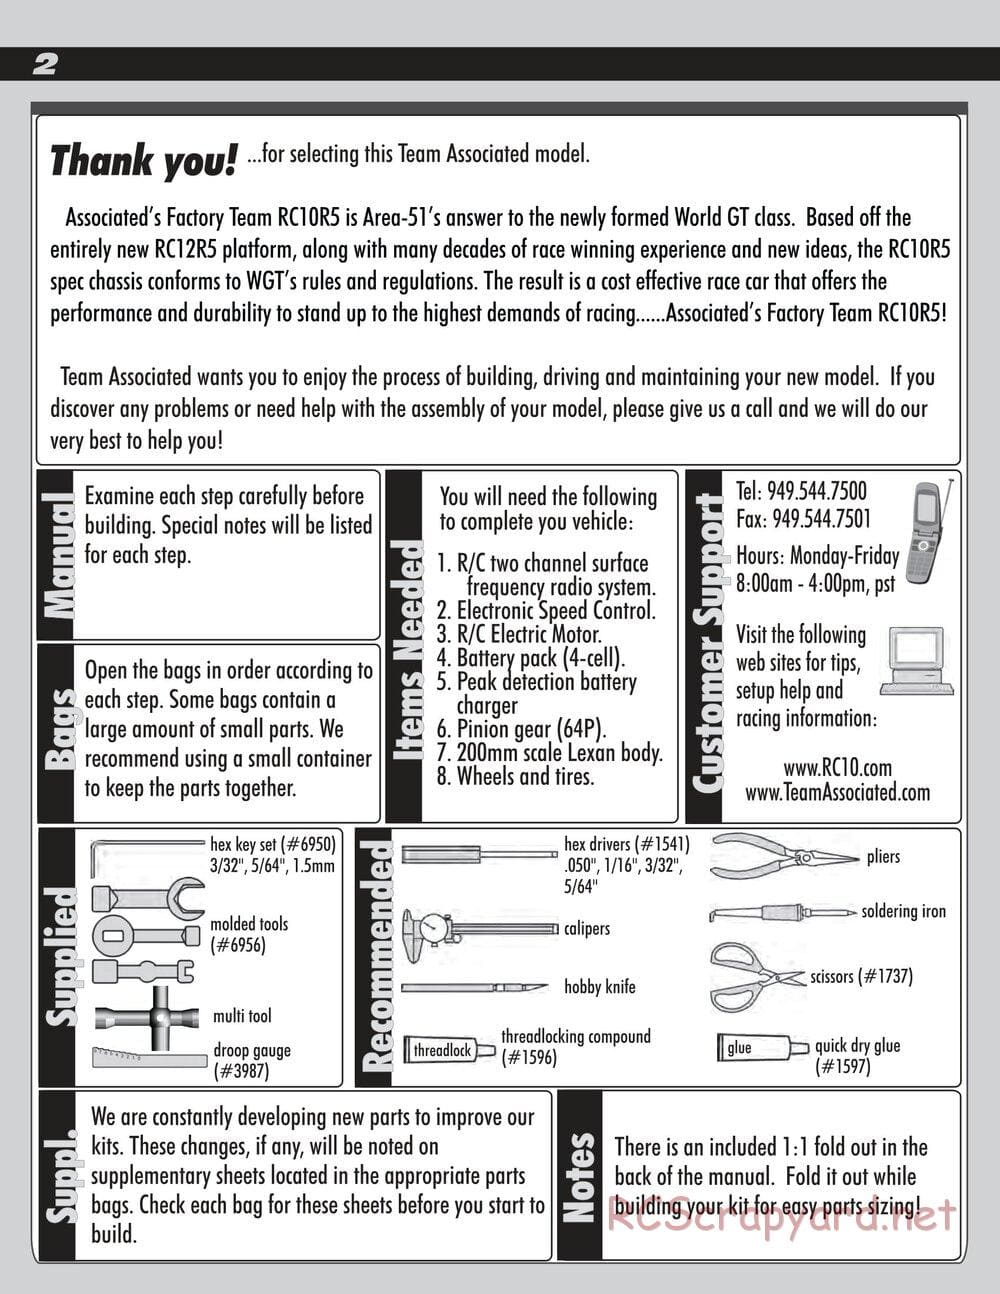 Team Associated - RC10R5 Factory Team - Manual - Page 2